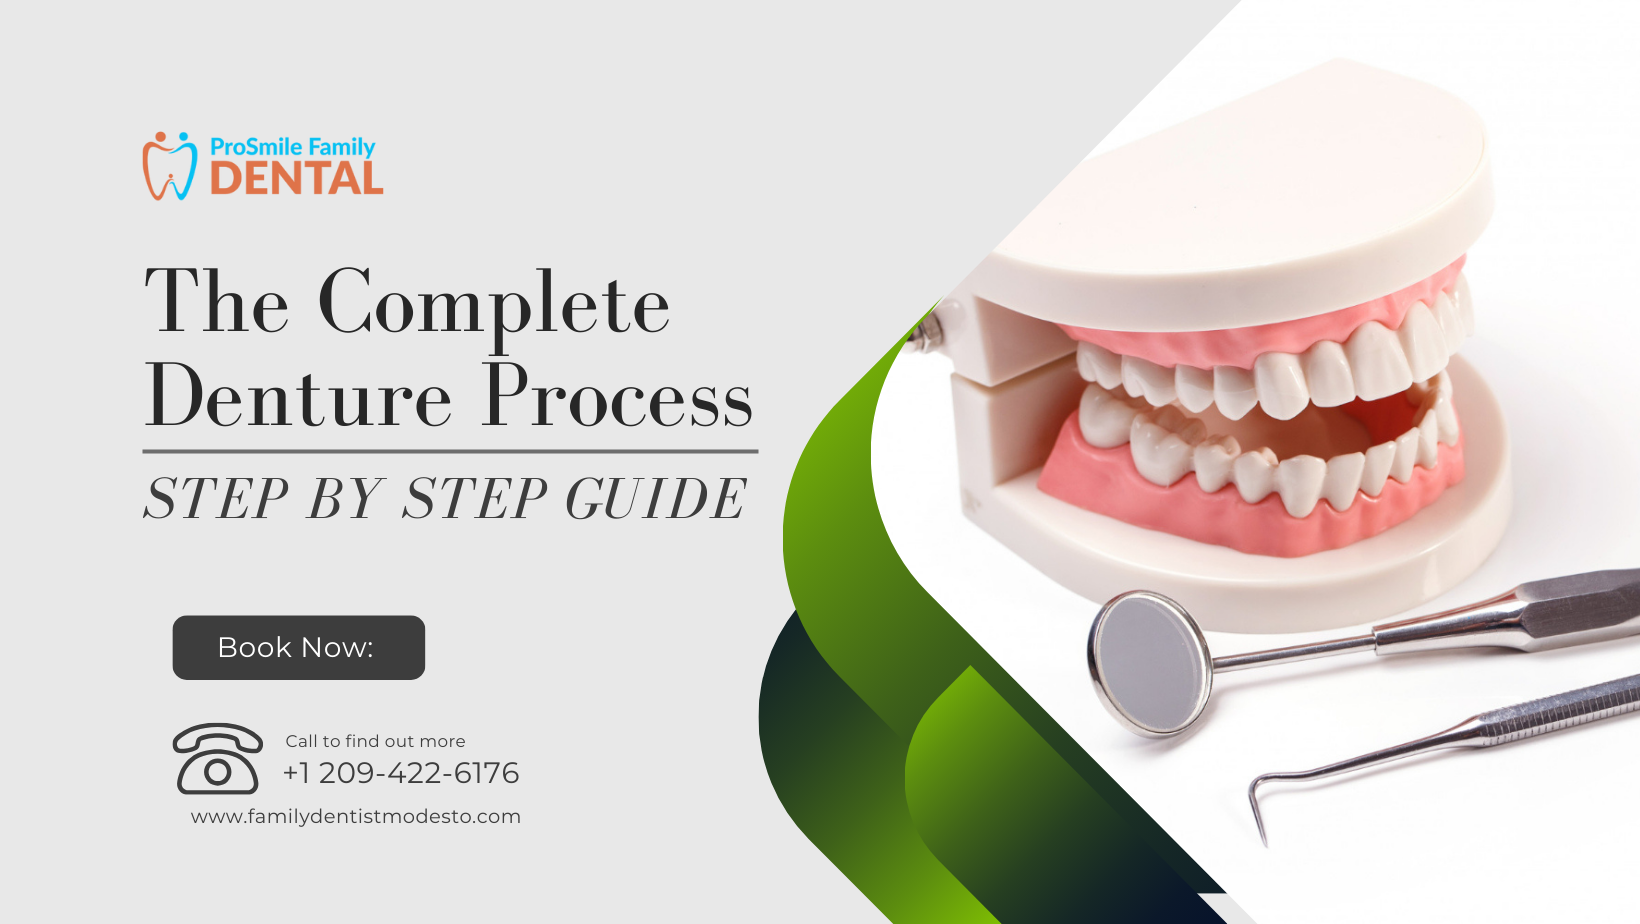 The Complete Denture Process